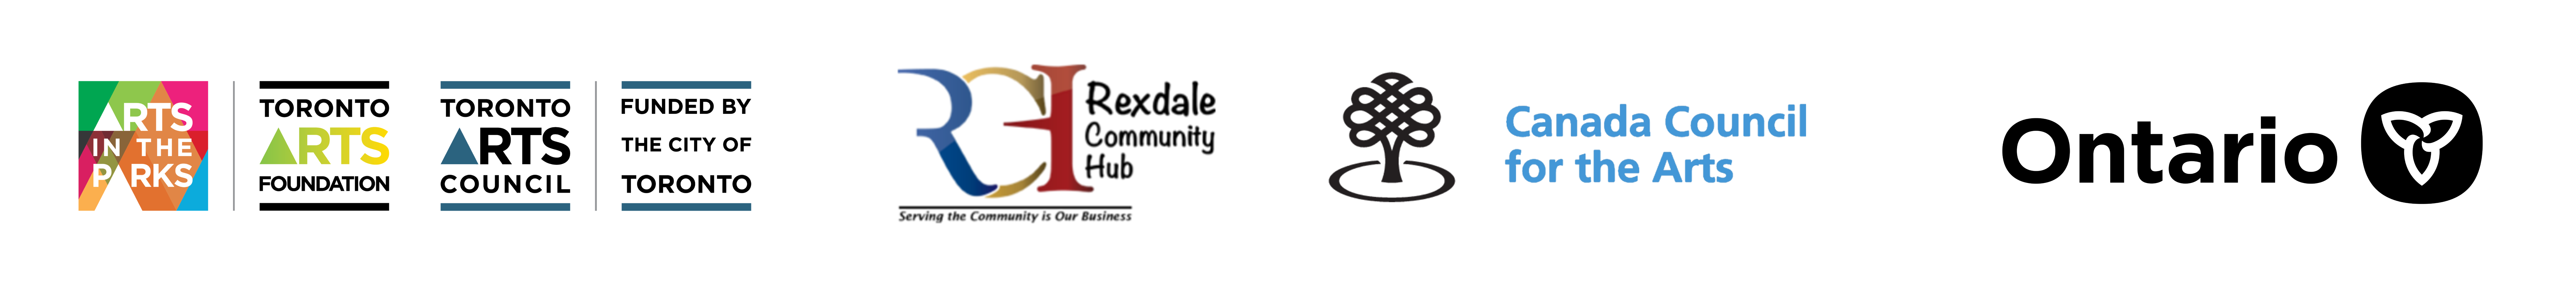 Logo banner with logos for Arts in the Park, Rexdale Community Hub, Canada Council for the Arts and the Ontario Government